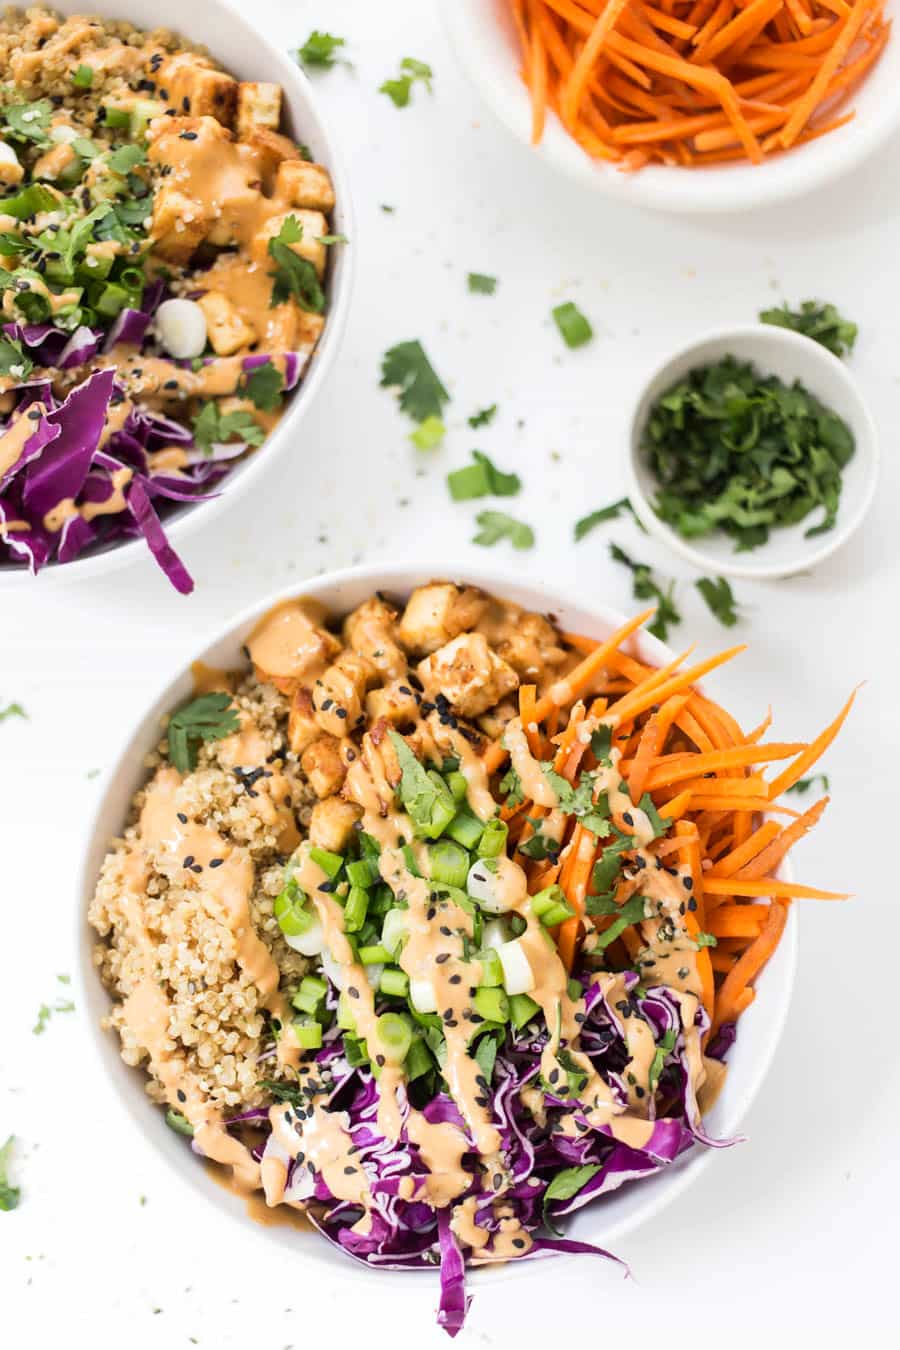 Asian Quinoa Bowls with Peanut Baked Tofu -- use up the veggies in your fridge to whip up this TASTY bowl meal!